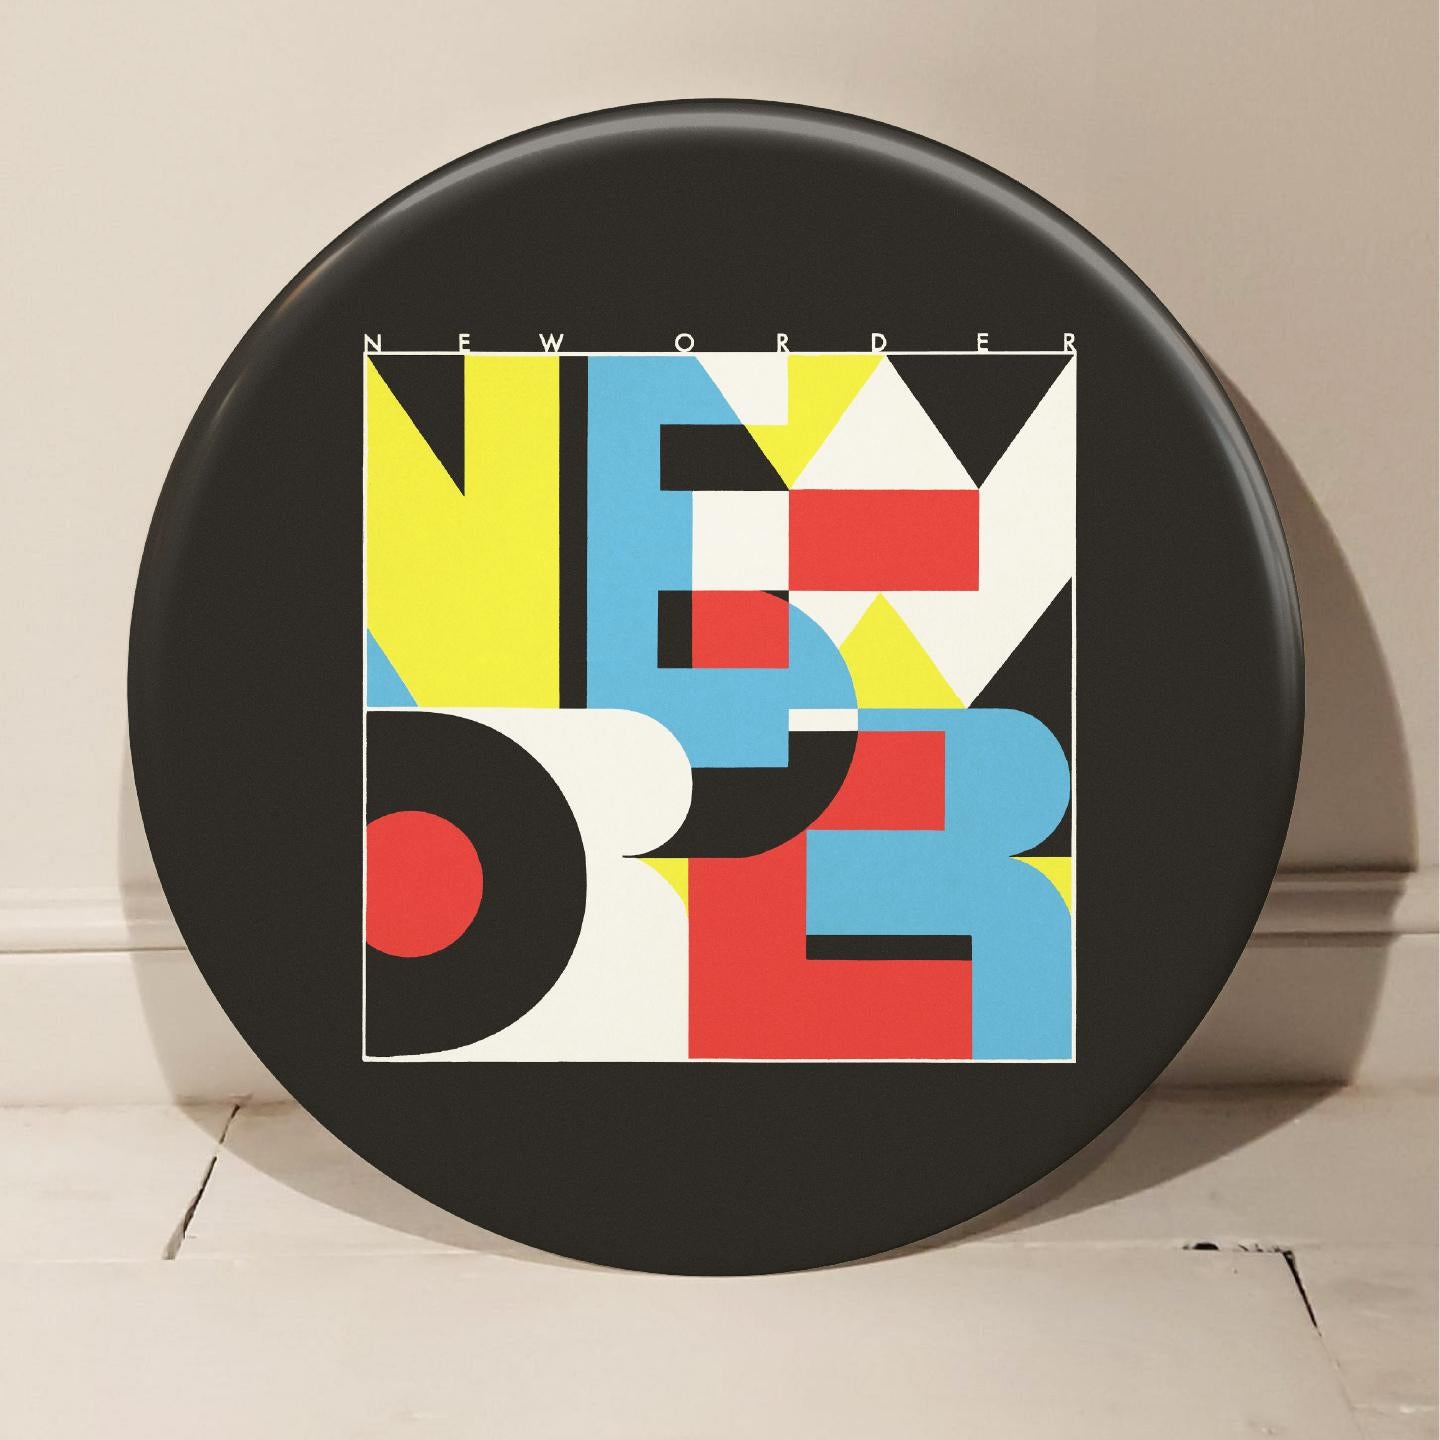 New Order Giant Handmade 3D Vintage Button